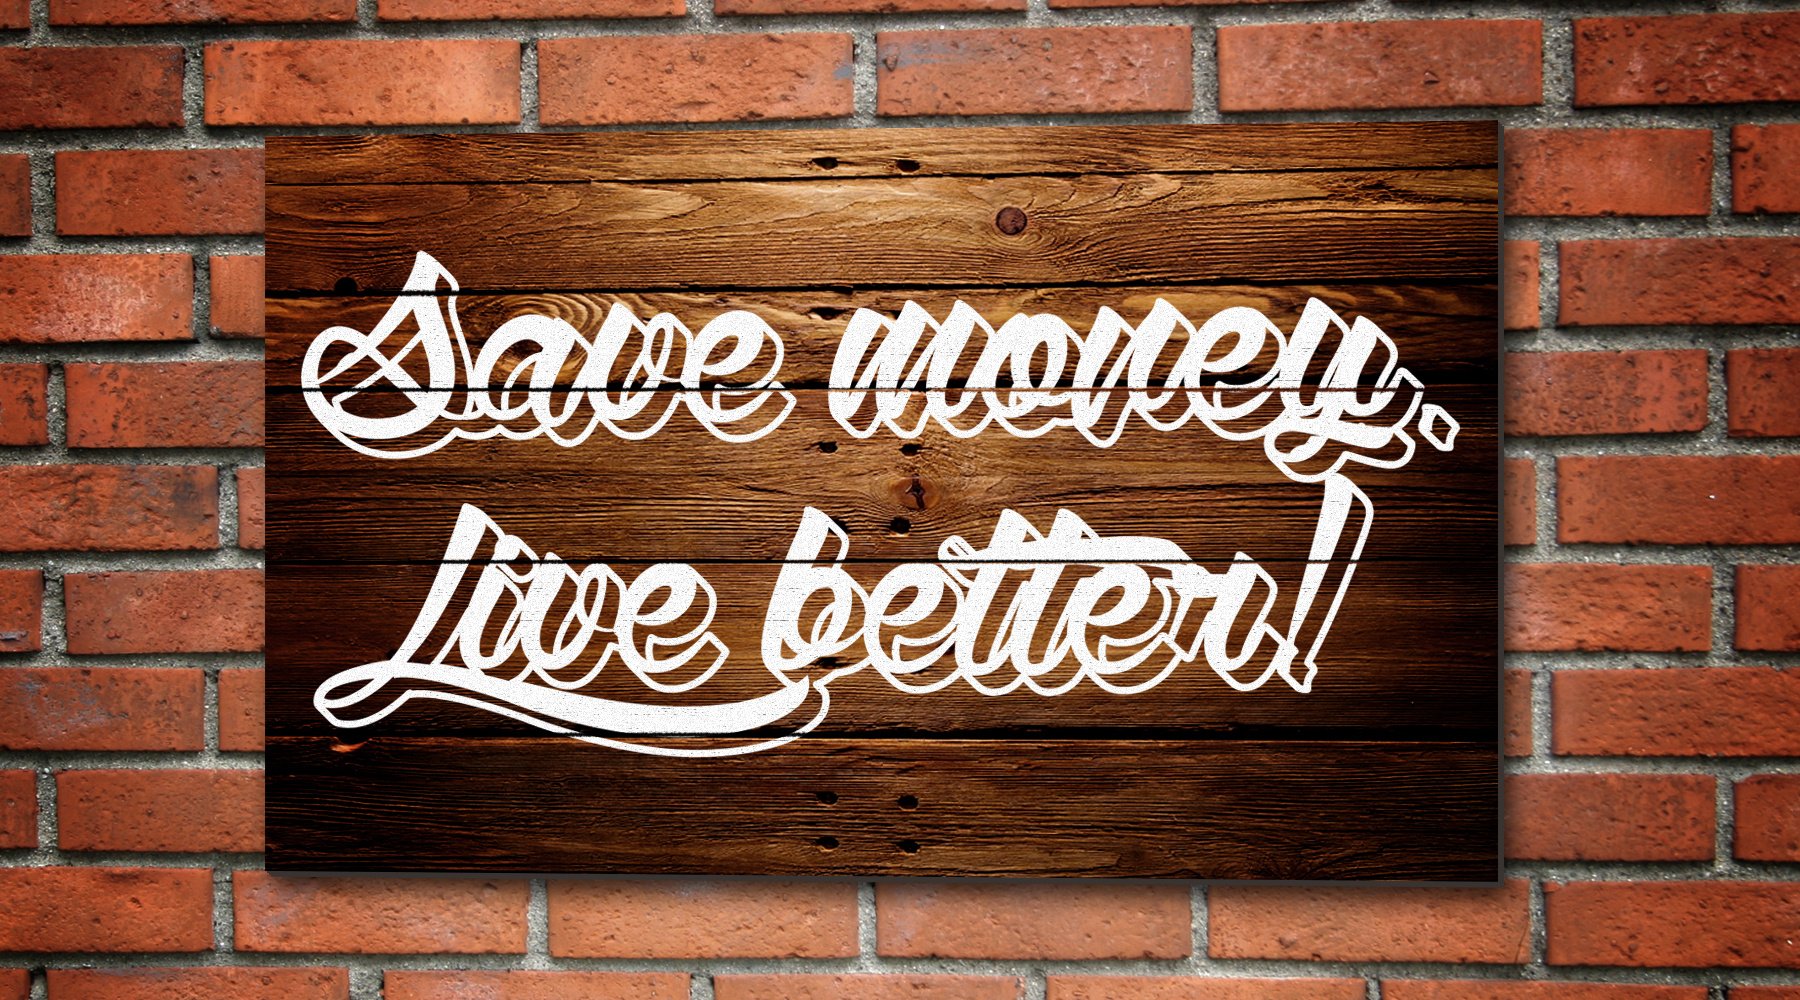 Save Money Wallpapers